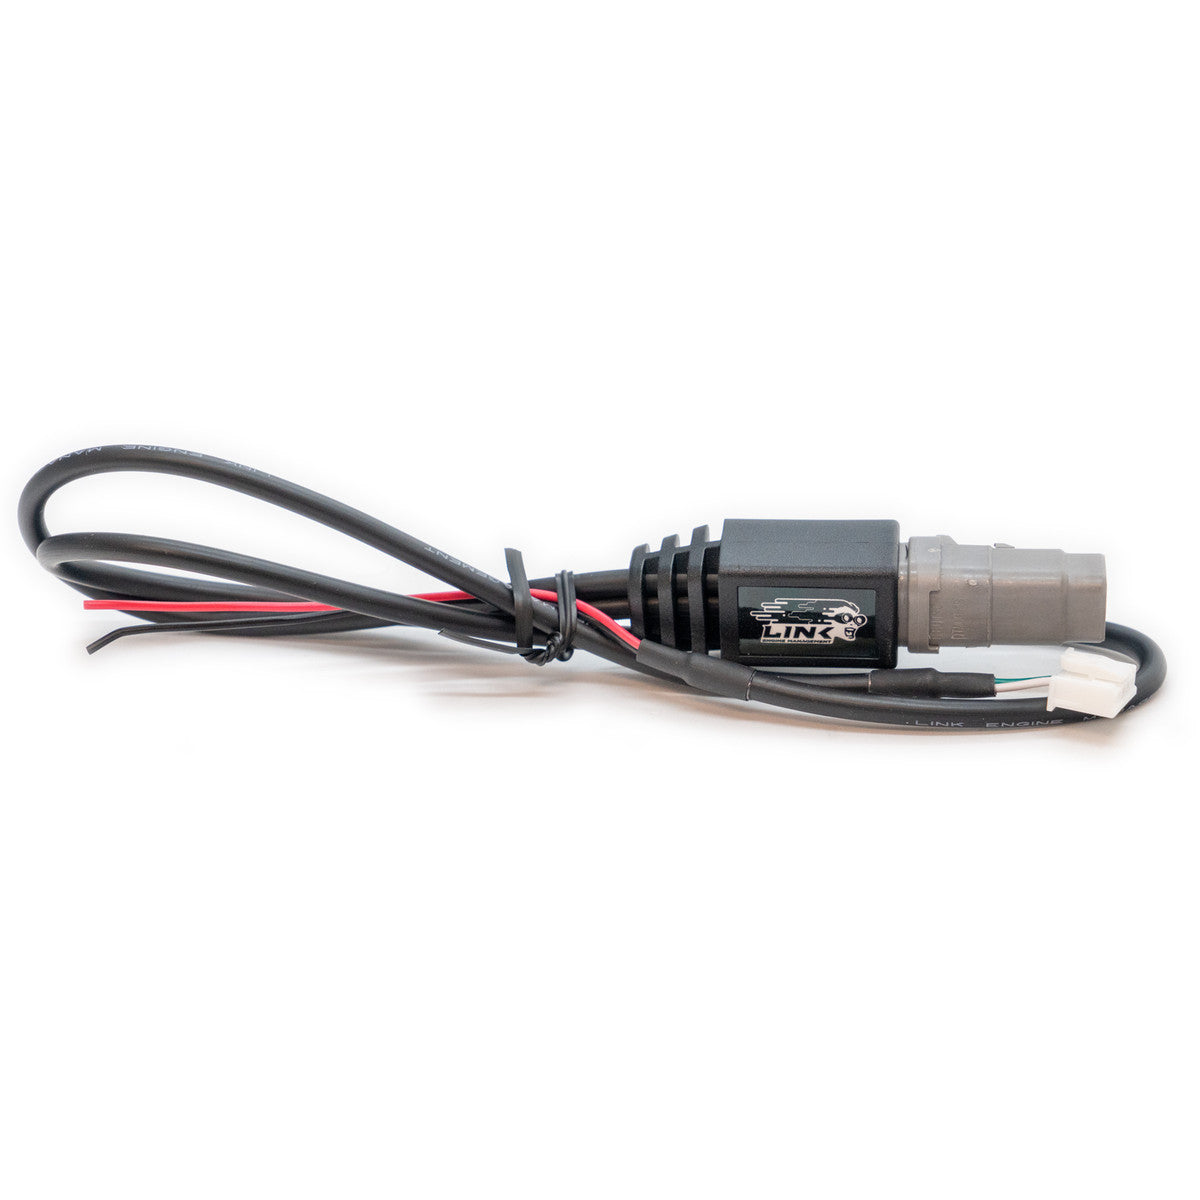 CANJST - Link CAN Connection Cable for G4X/G4+ Plug-in ECU's